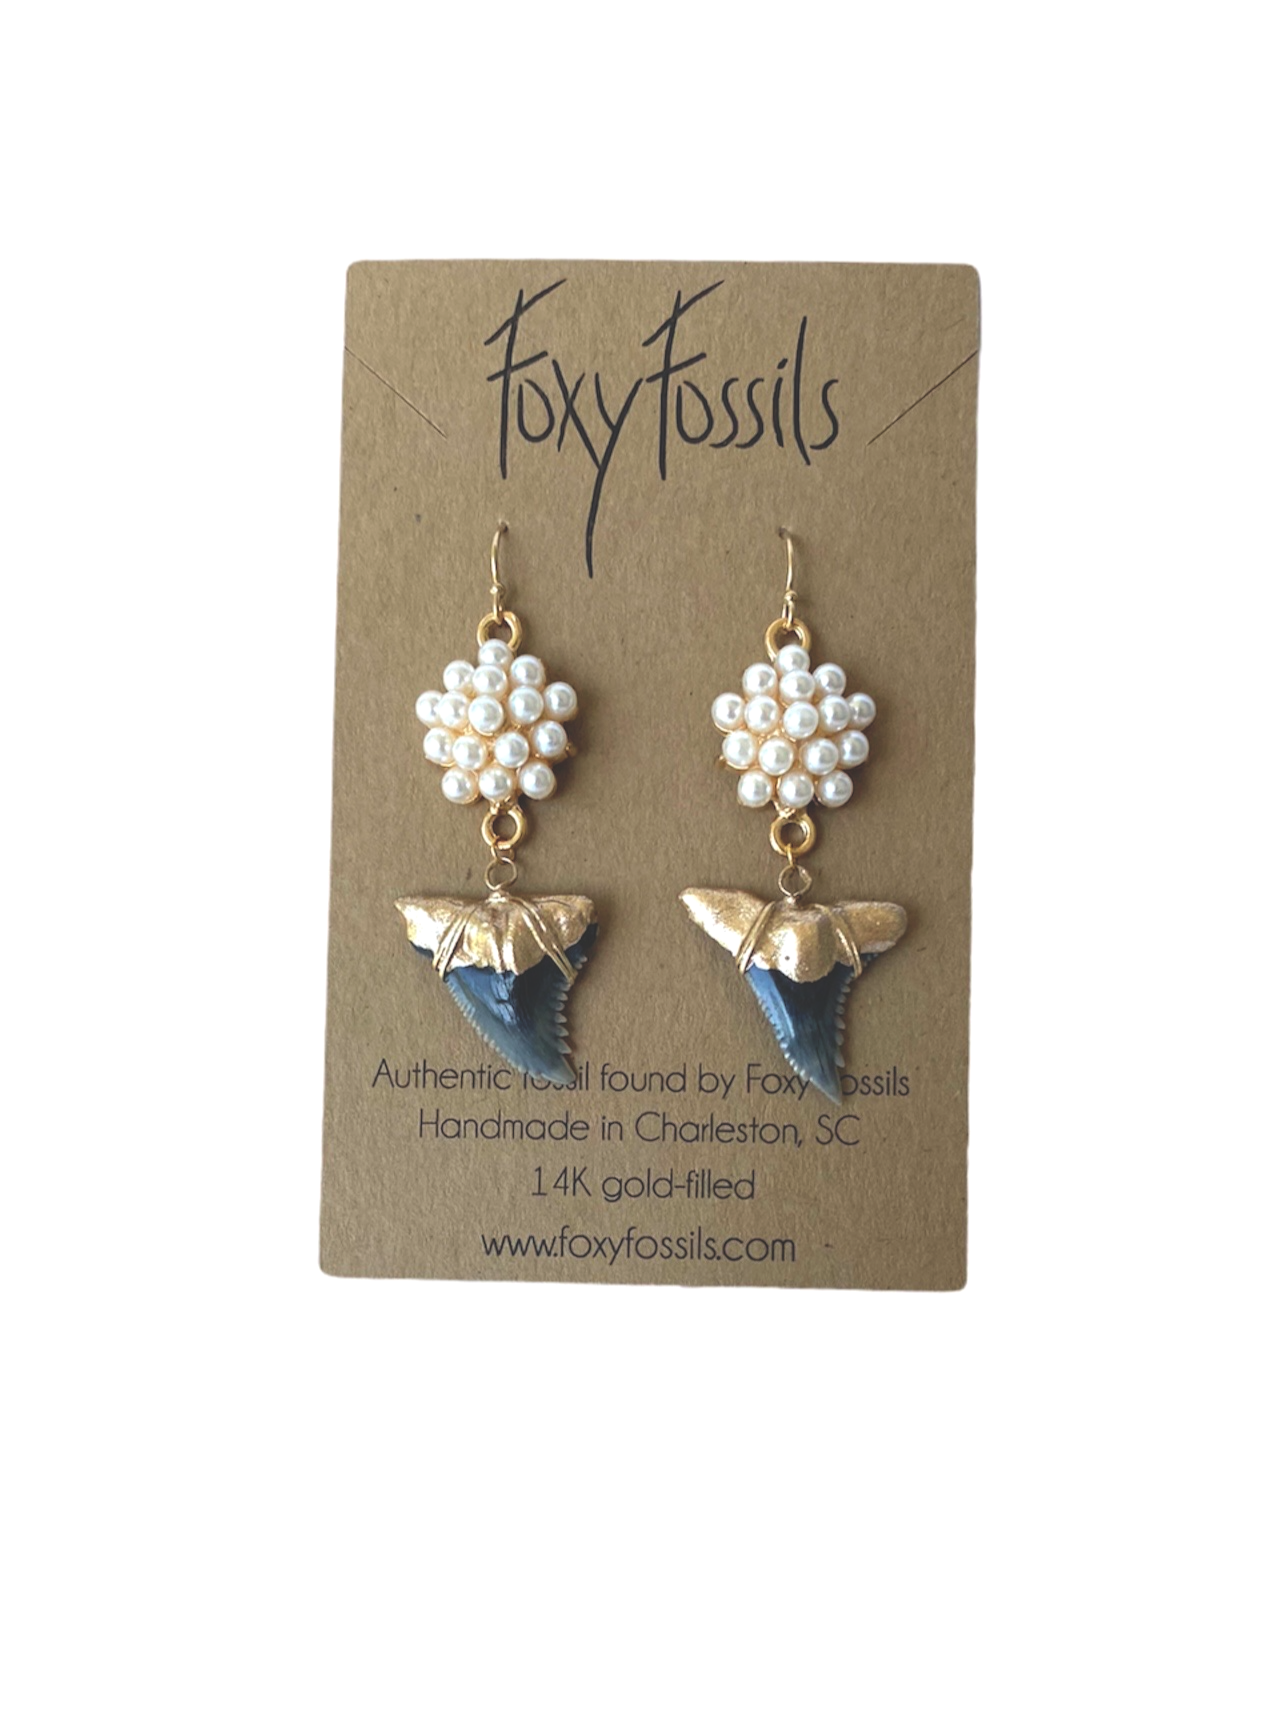 hemi earrings authentic fossil shark tooth earrings gold tip with cluster of pearls-ethically sourced fossilized earrings—Foxy Fossils 